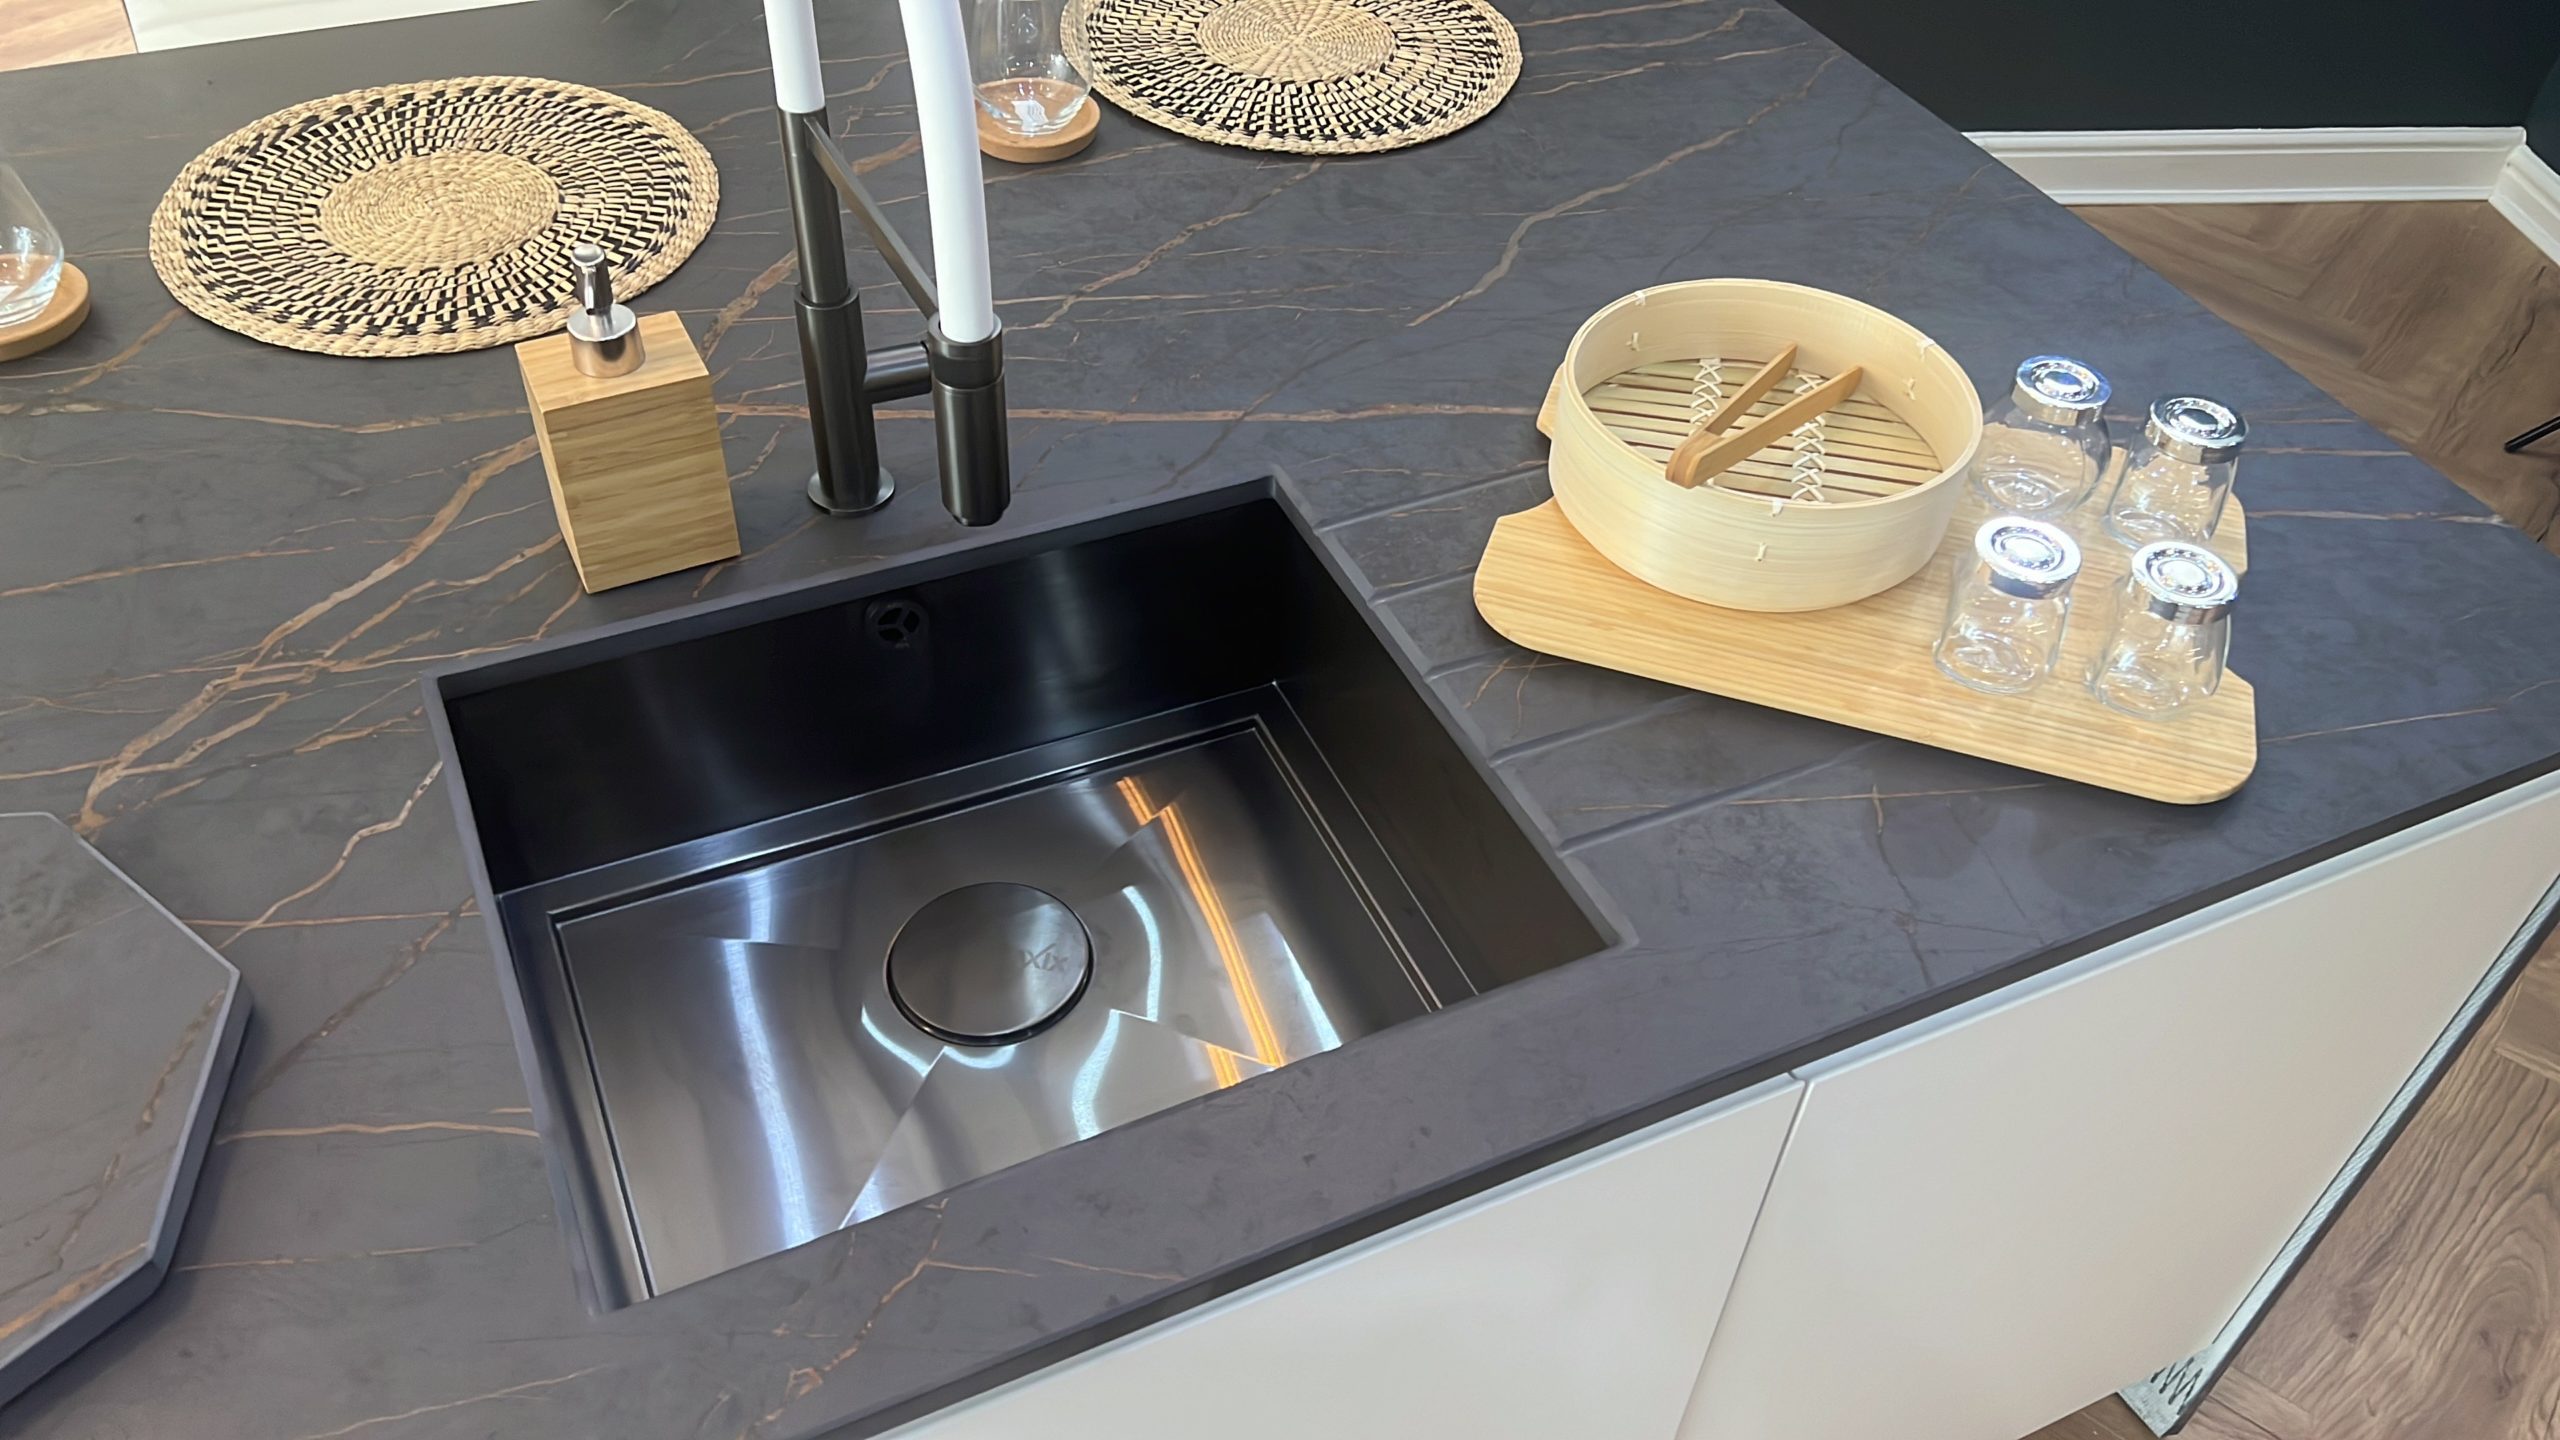 Close up image of a dekton worktop installed in a kitchen